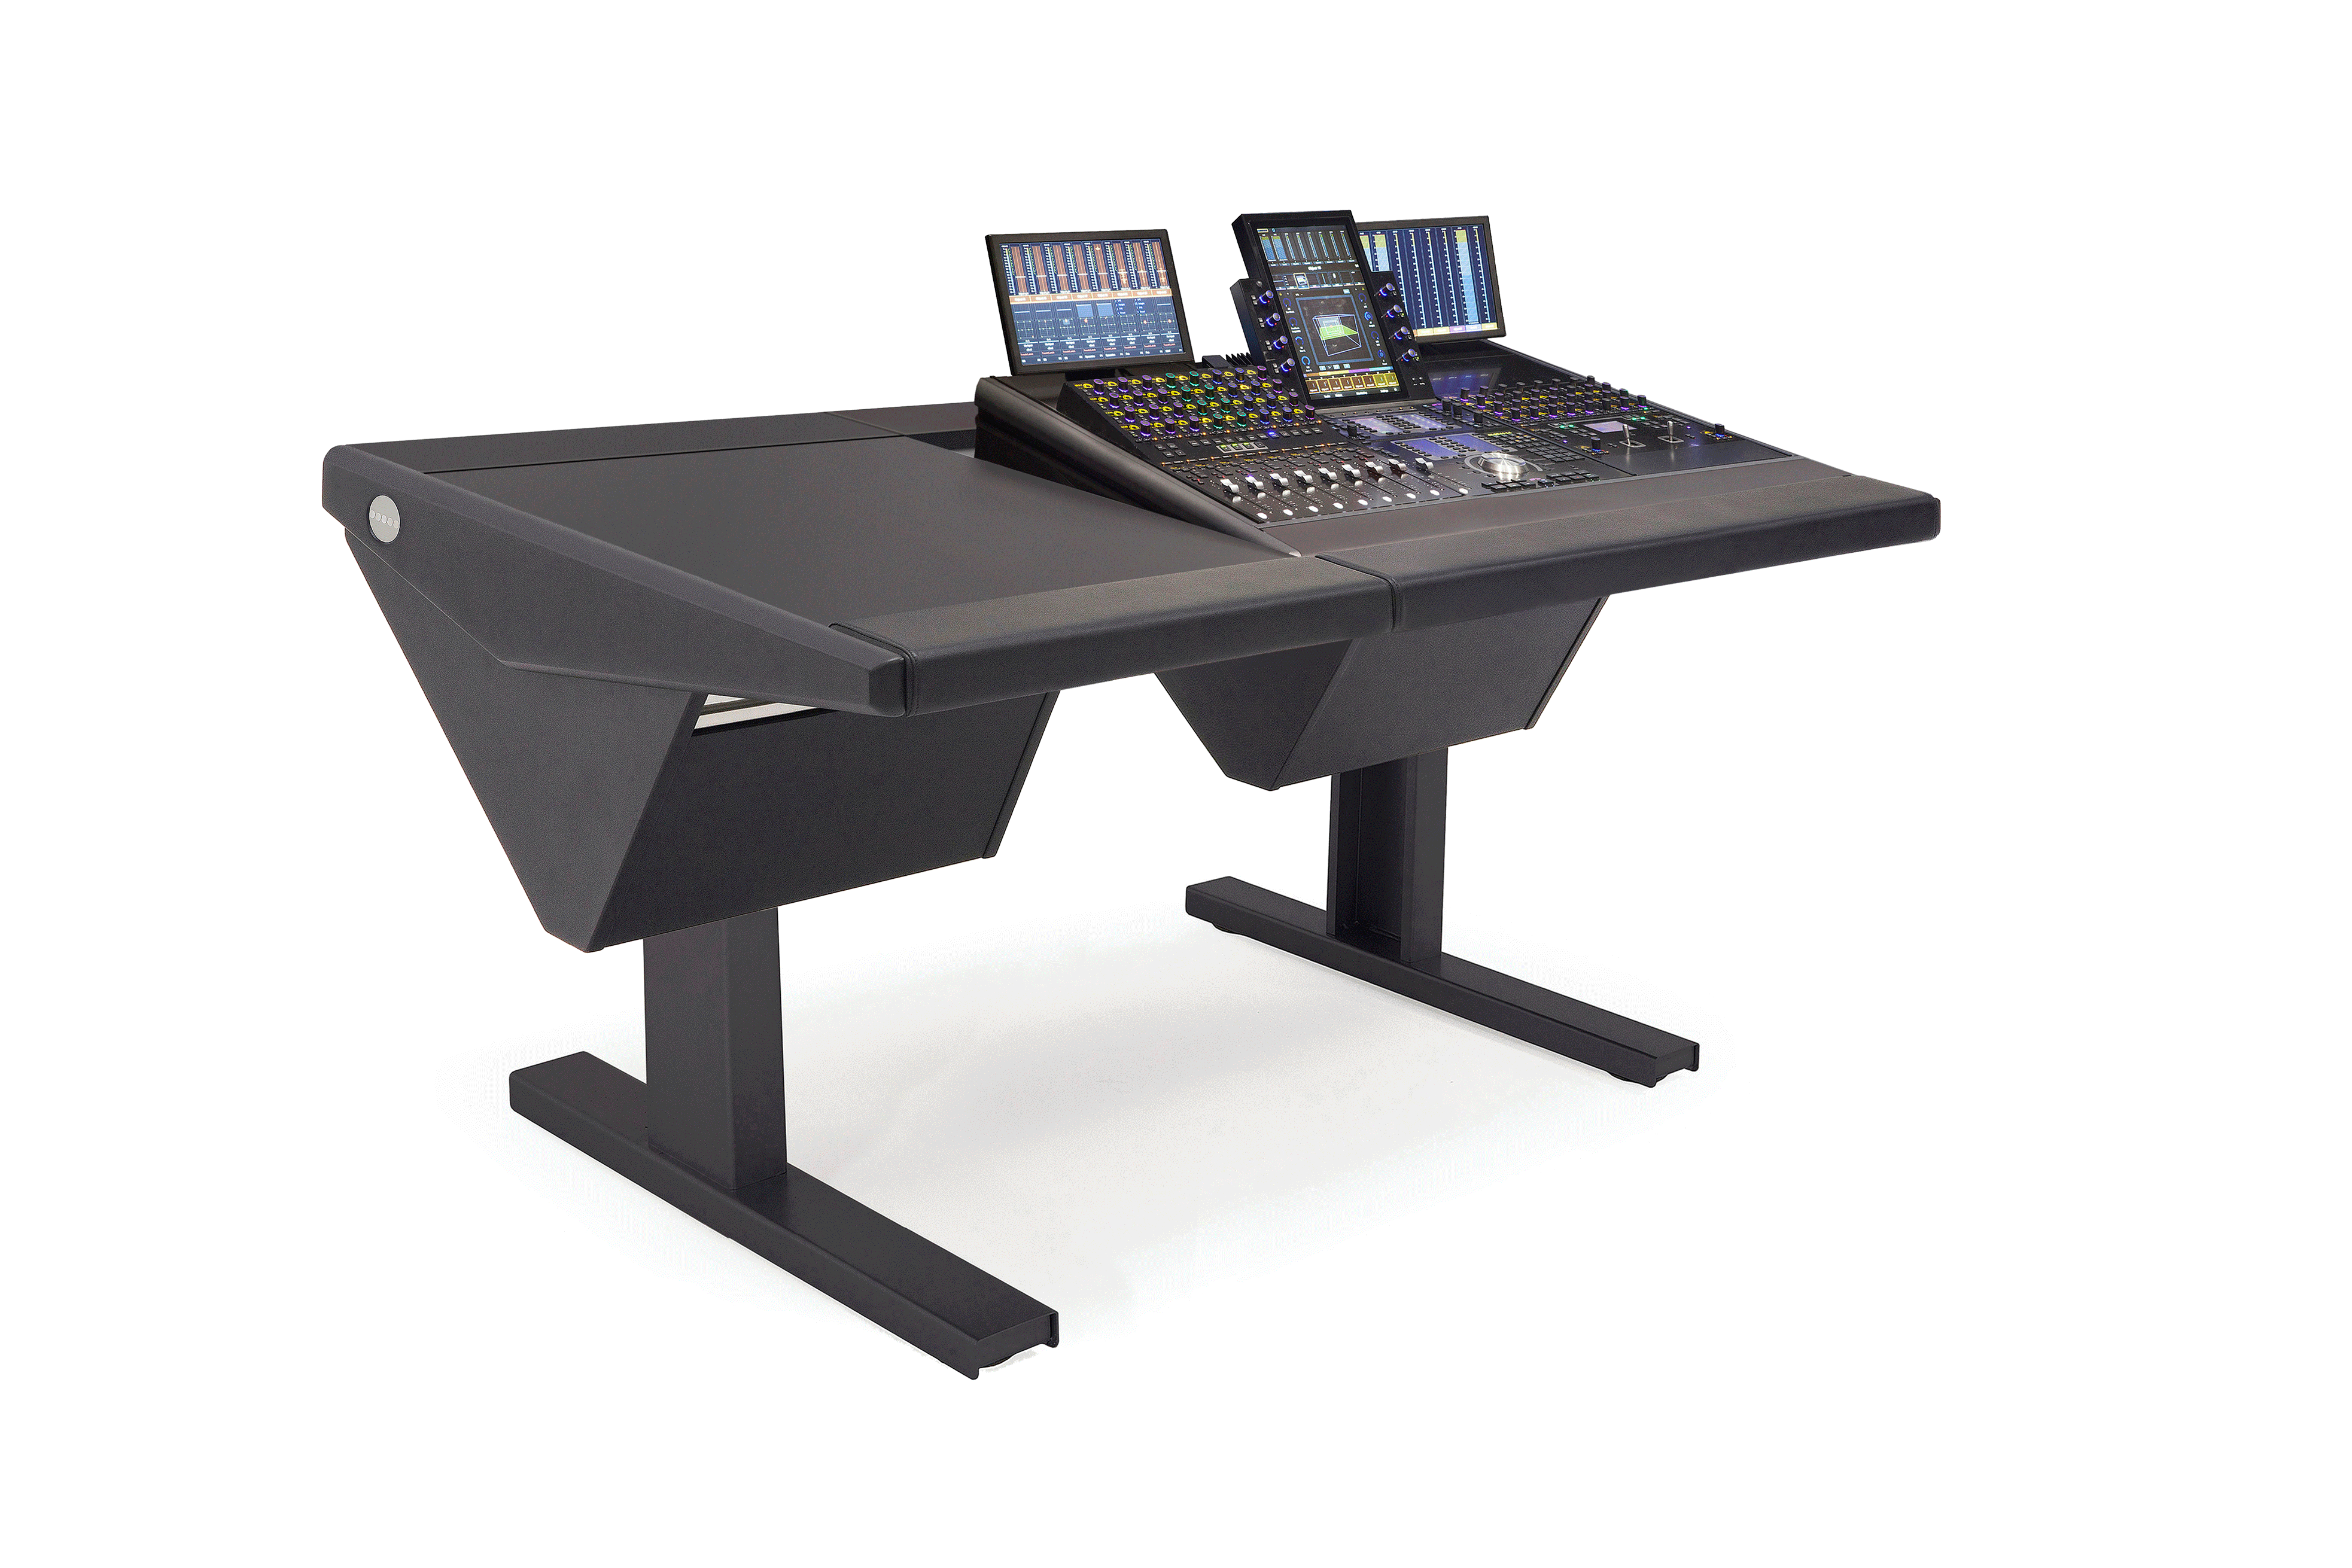 S4 - 3 Foot Wide Base System with Desk (L)